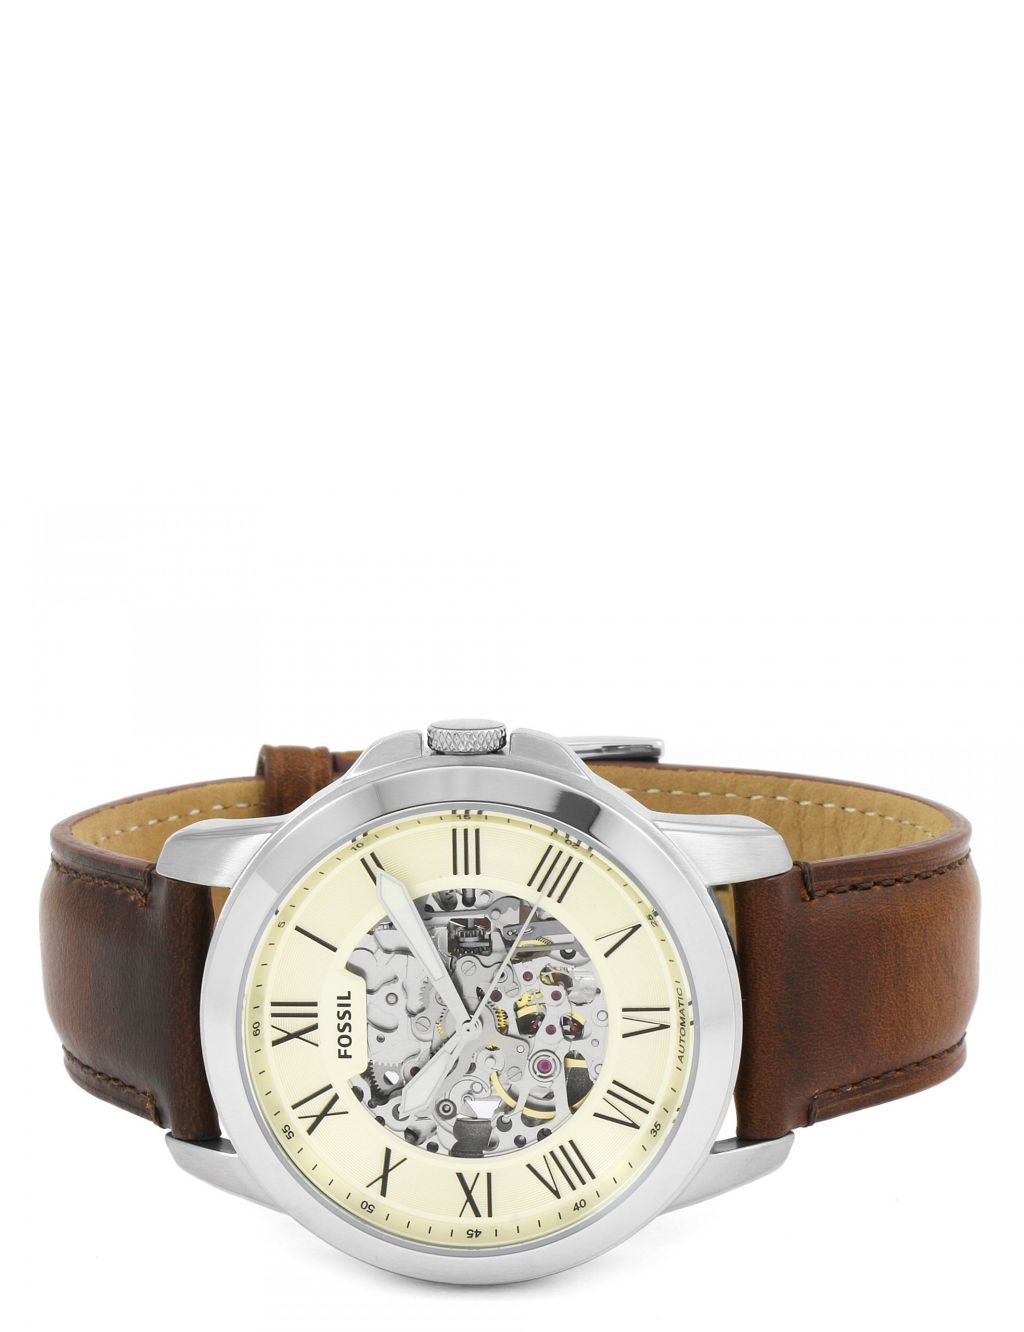 Fossil Grant Brown Leather Chronograph Automatic Watch image 3